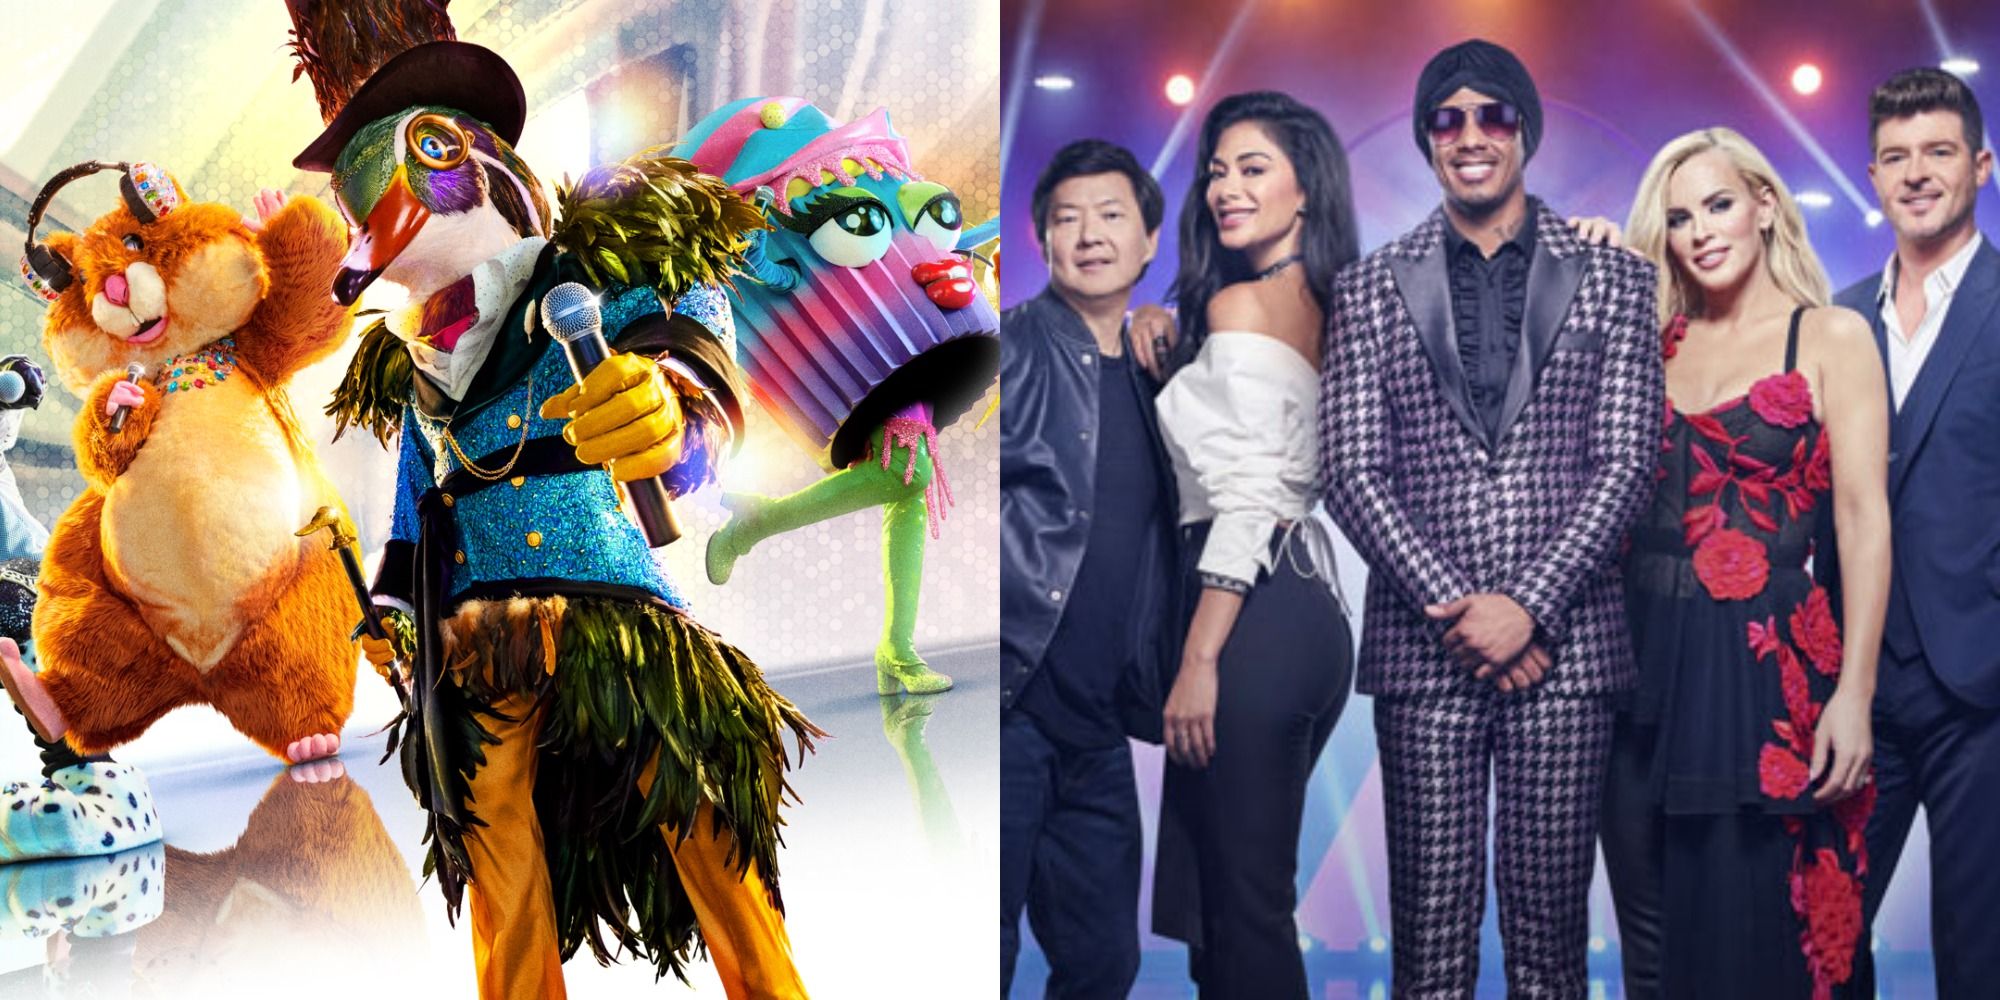 Split image showing contestants for The Masked Singer and the judges and host